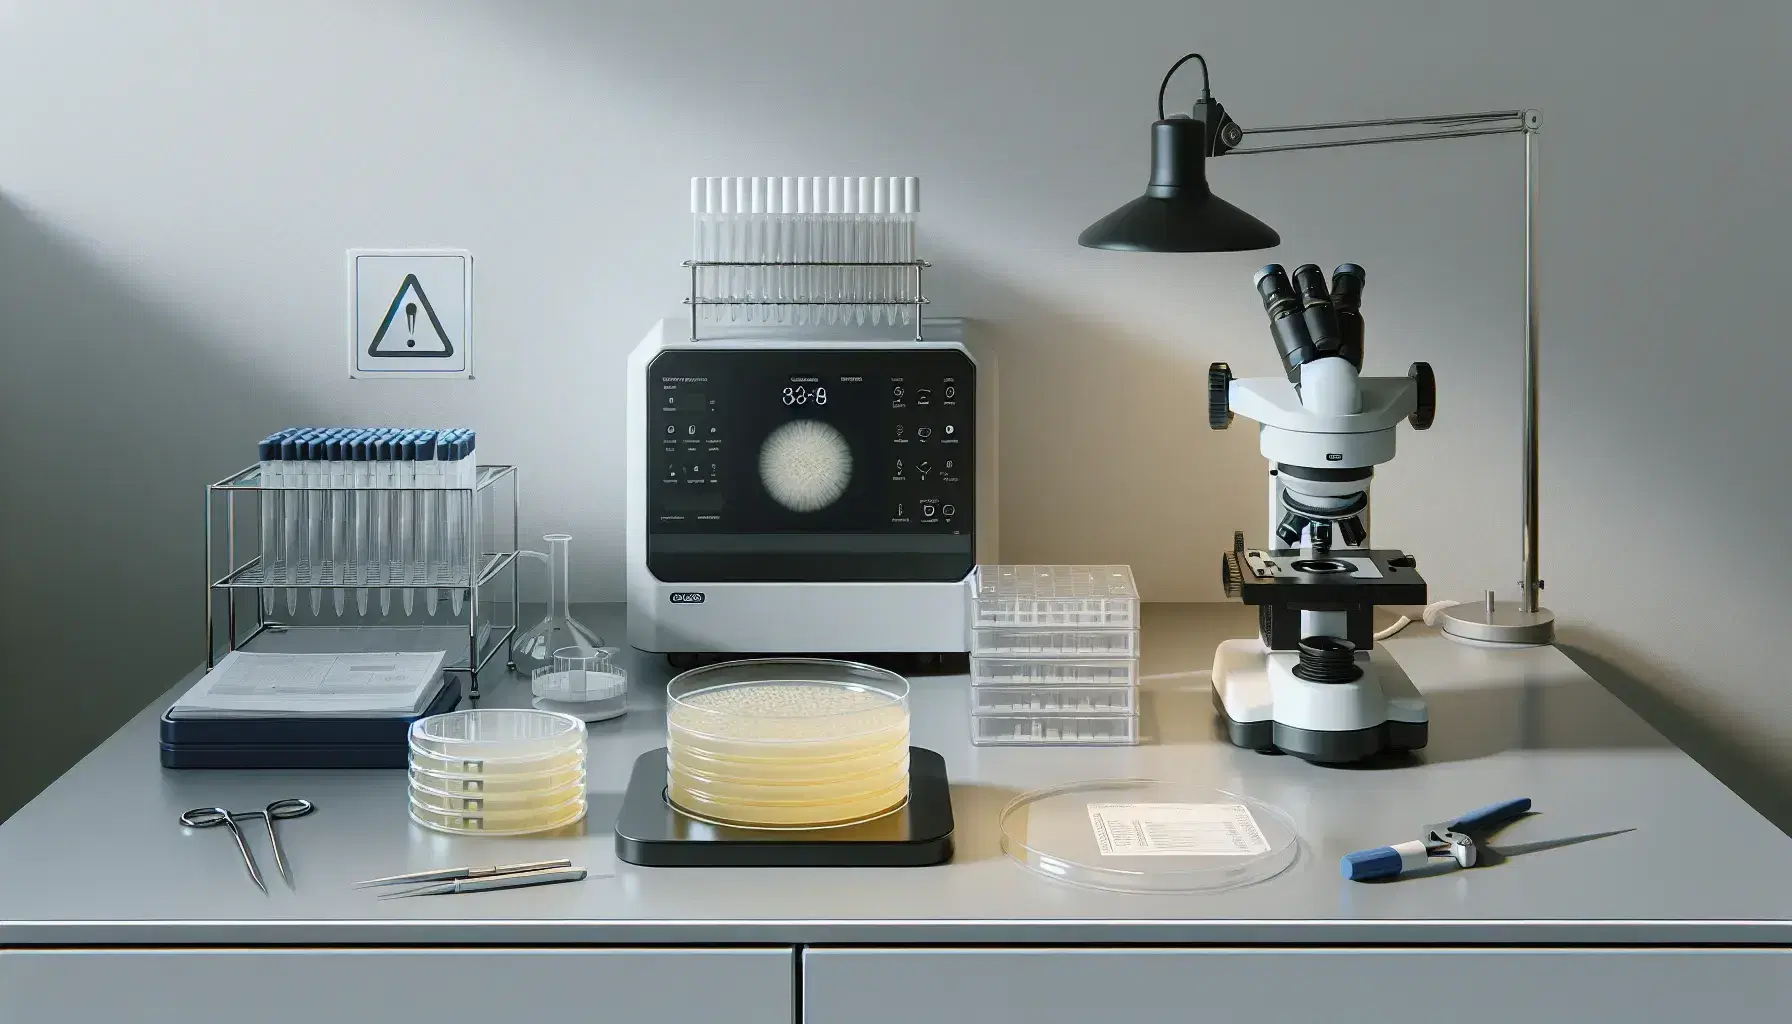 Laboratory workbench with scientific equipment including an open microcentrifuge, petri dish with yeast colonies, pipette pump, tips, and a microscope.